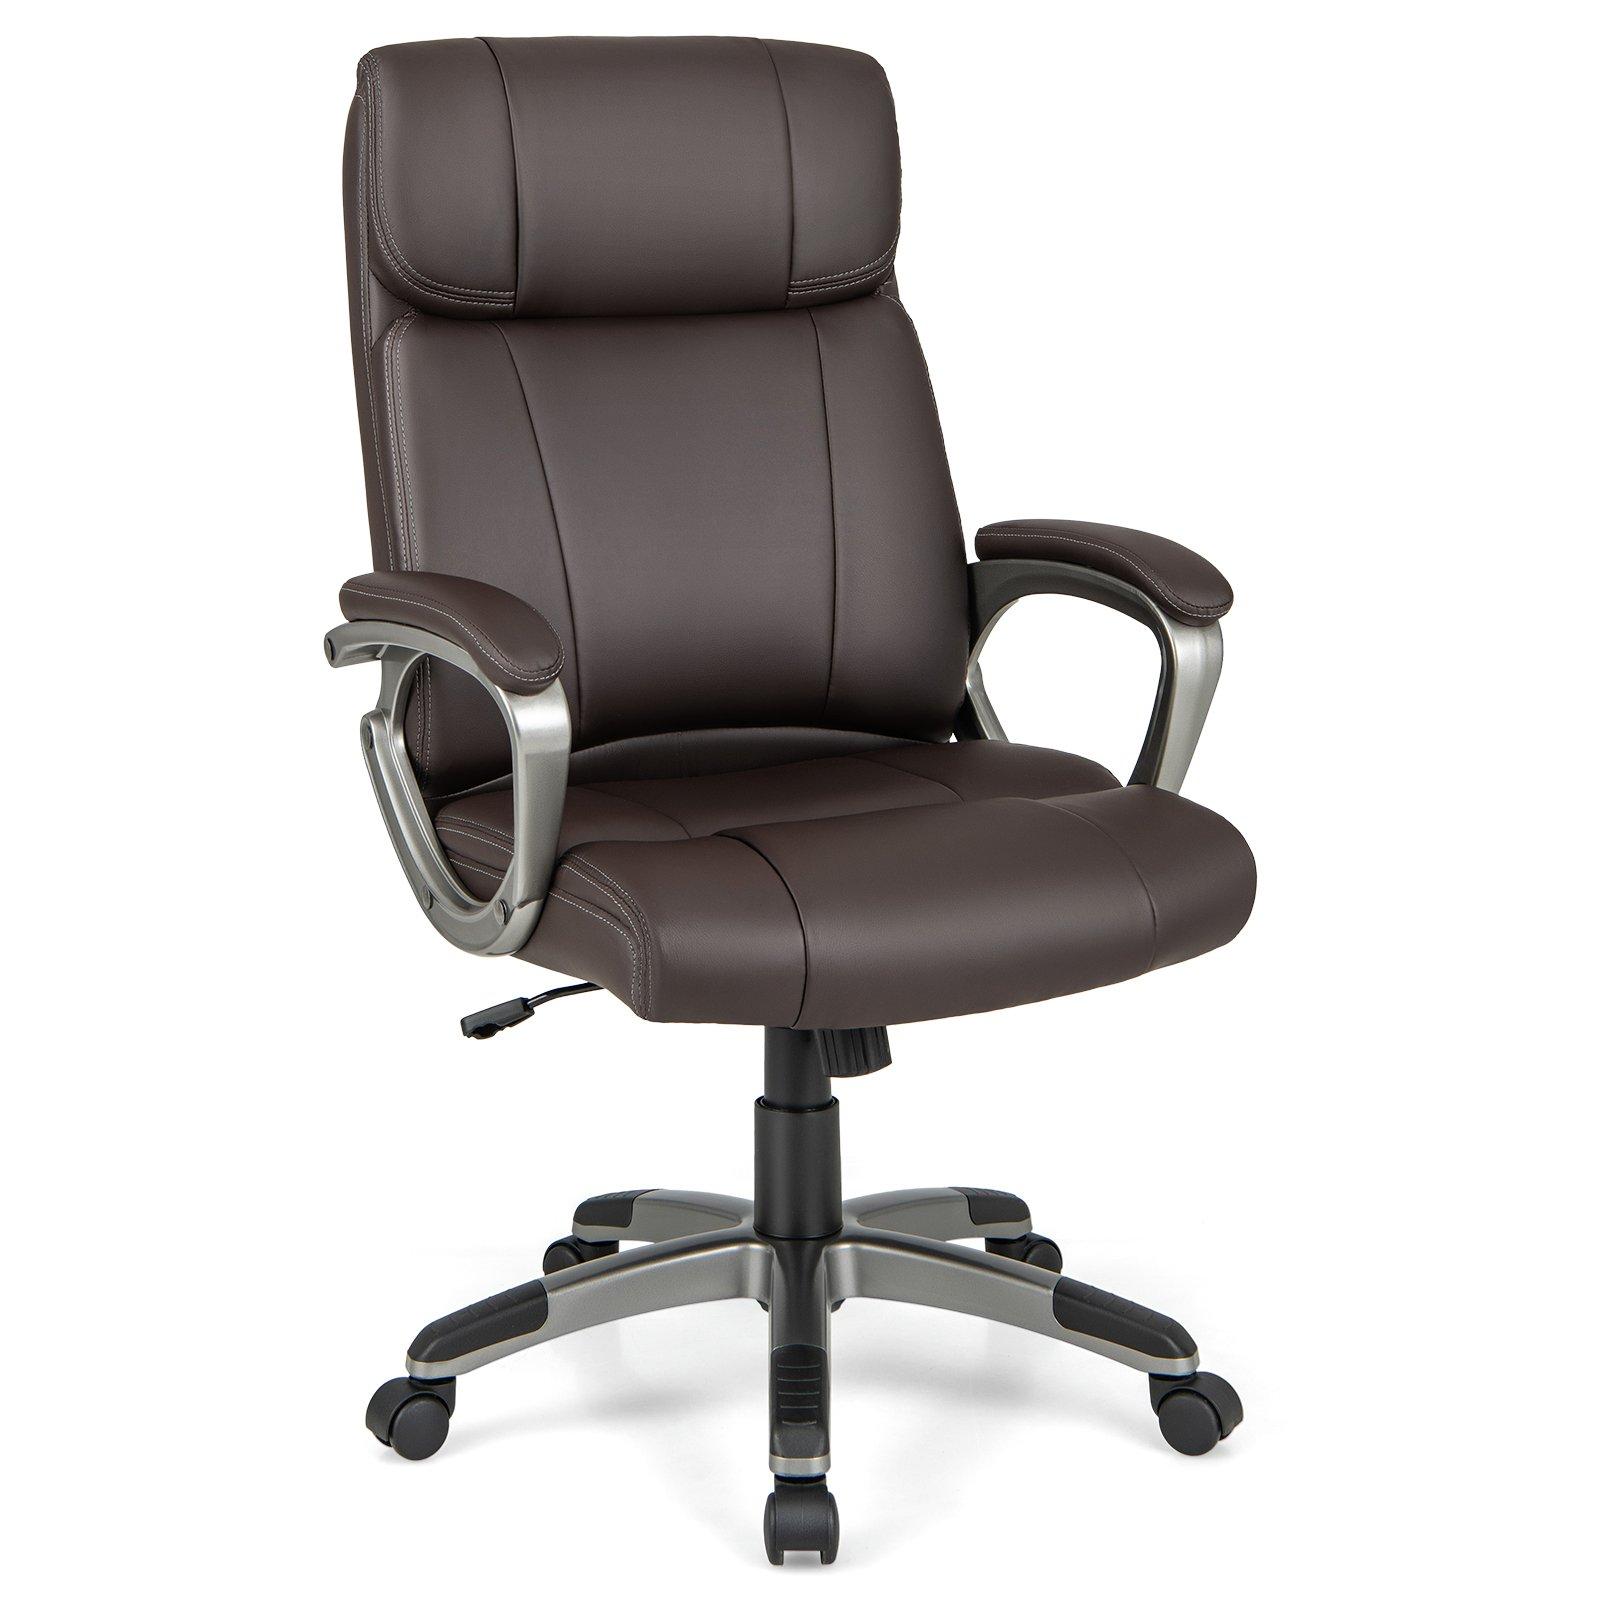 Executive Office Chair 360 Swivel PU Leather Computer Desk Chair W/ Rock Function